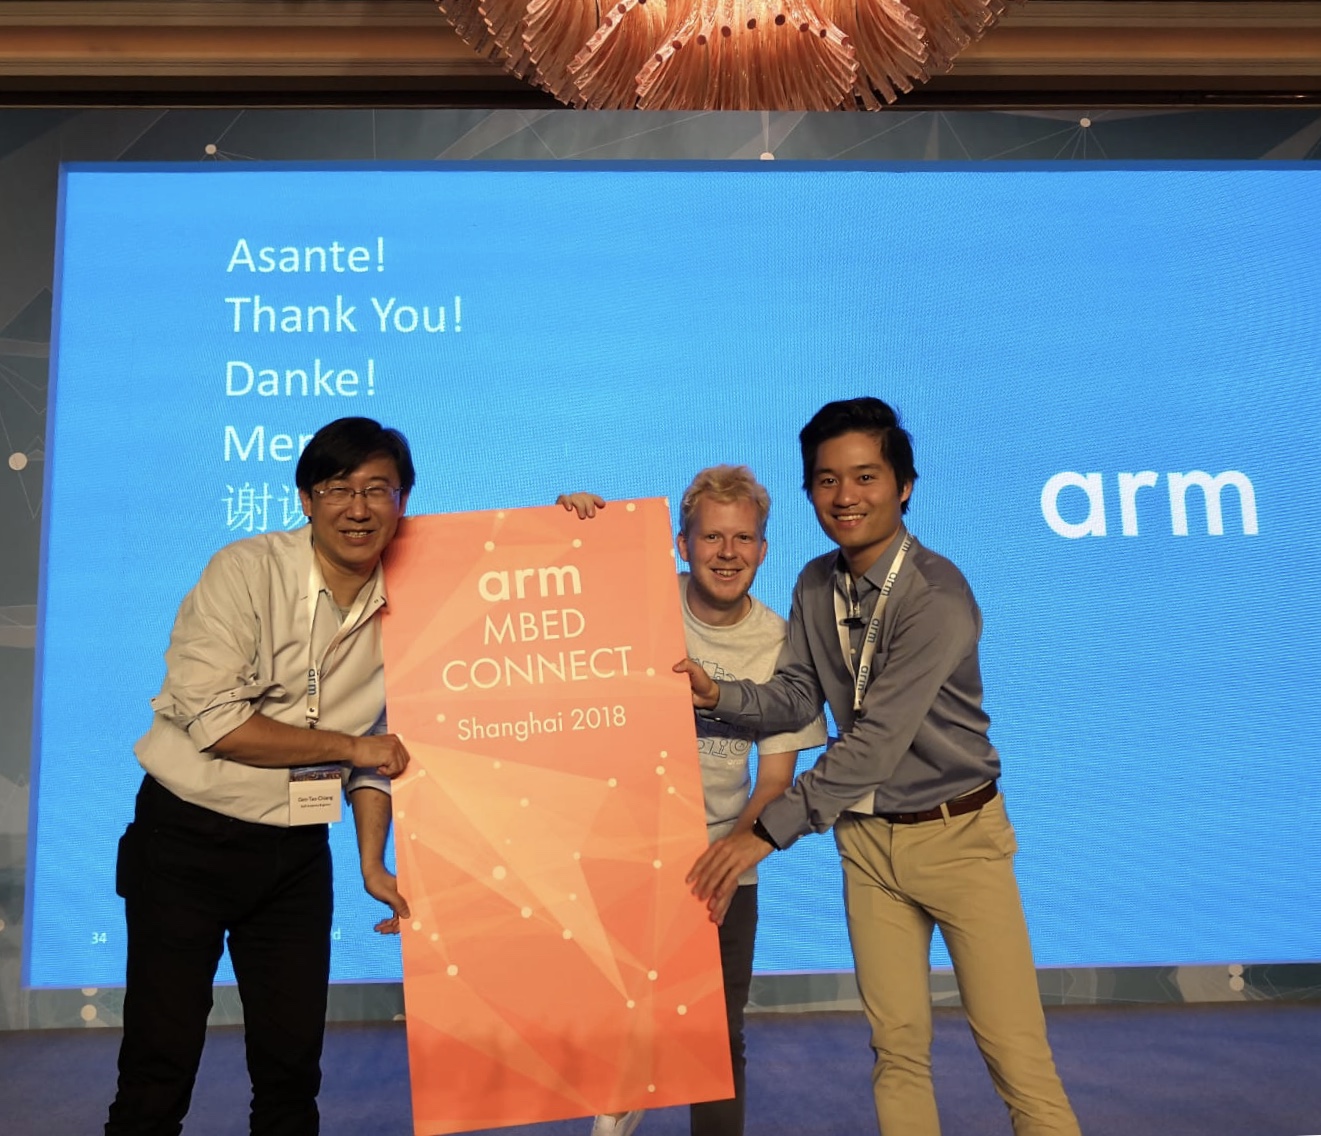 Gen-Tao Chiang, Jan Jongboom and Neil Tan at Mbed Connect China